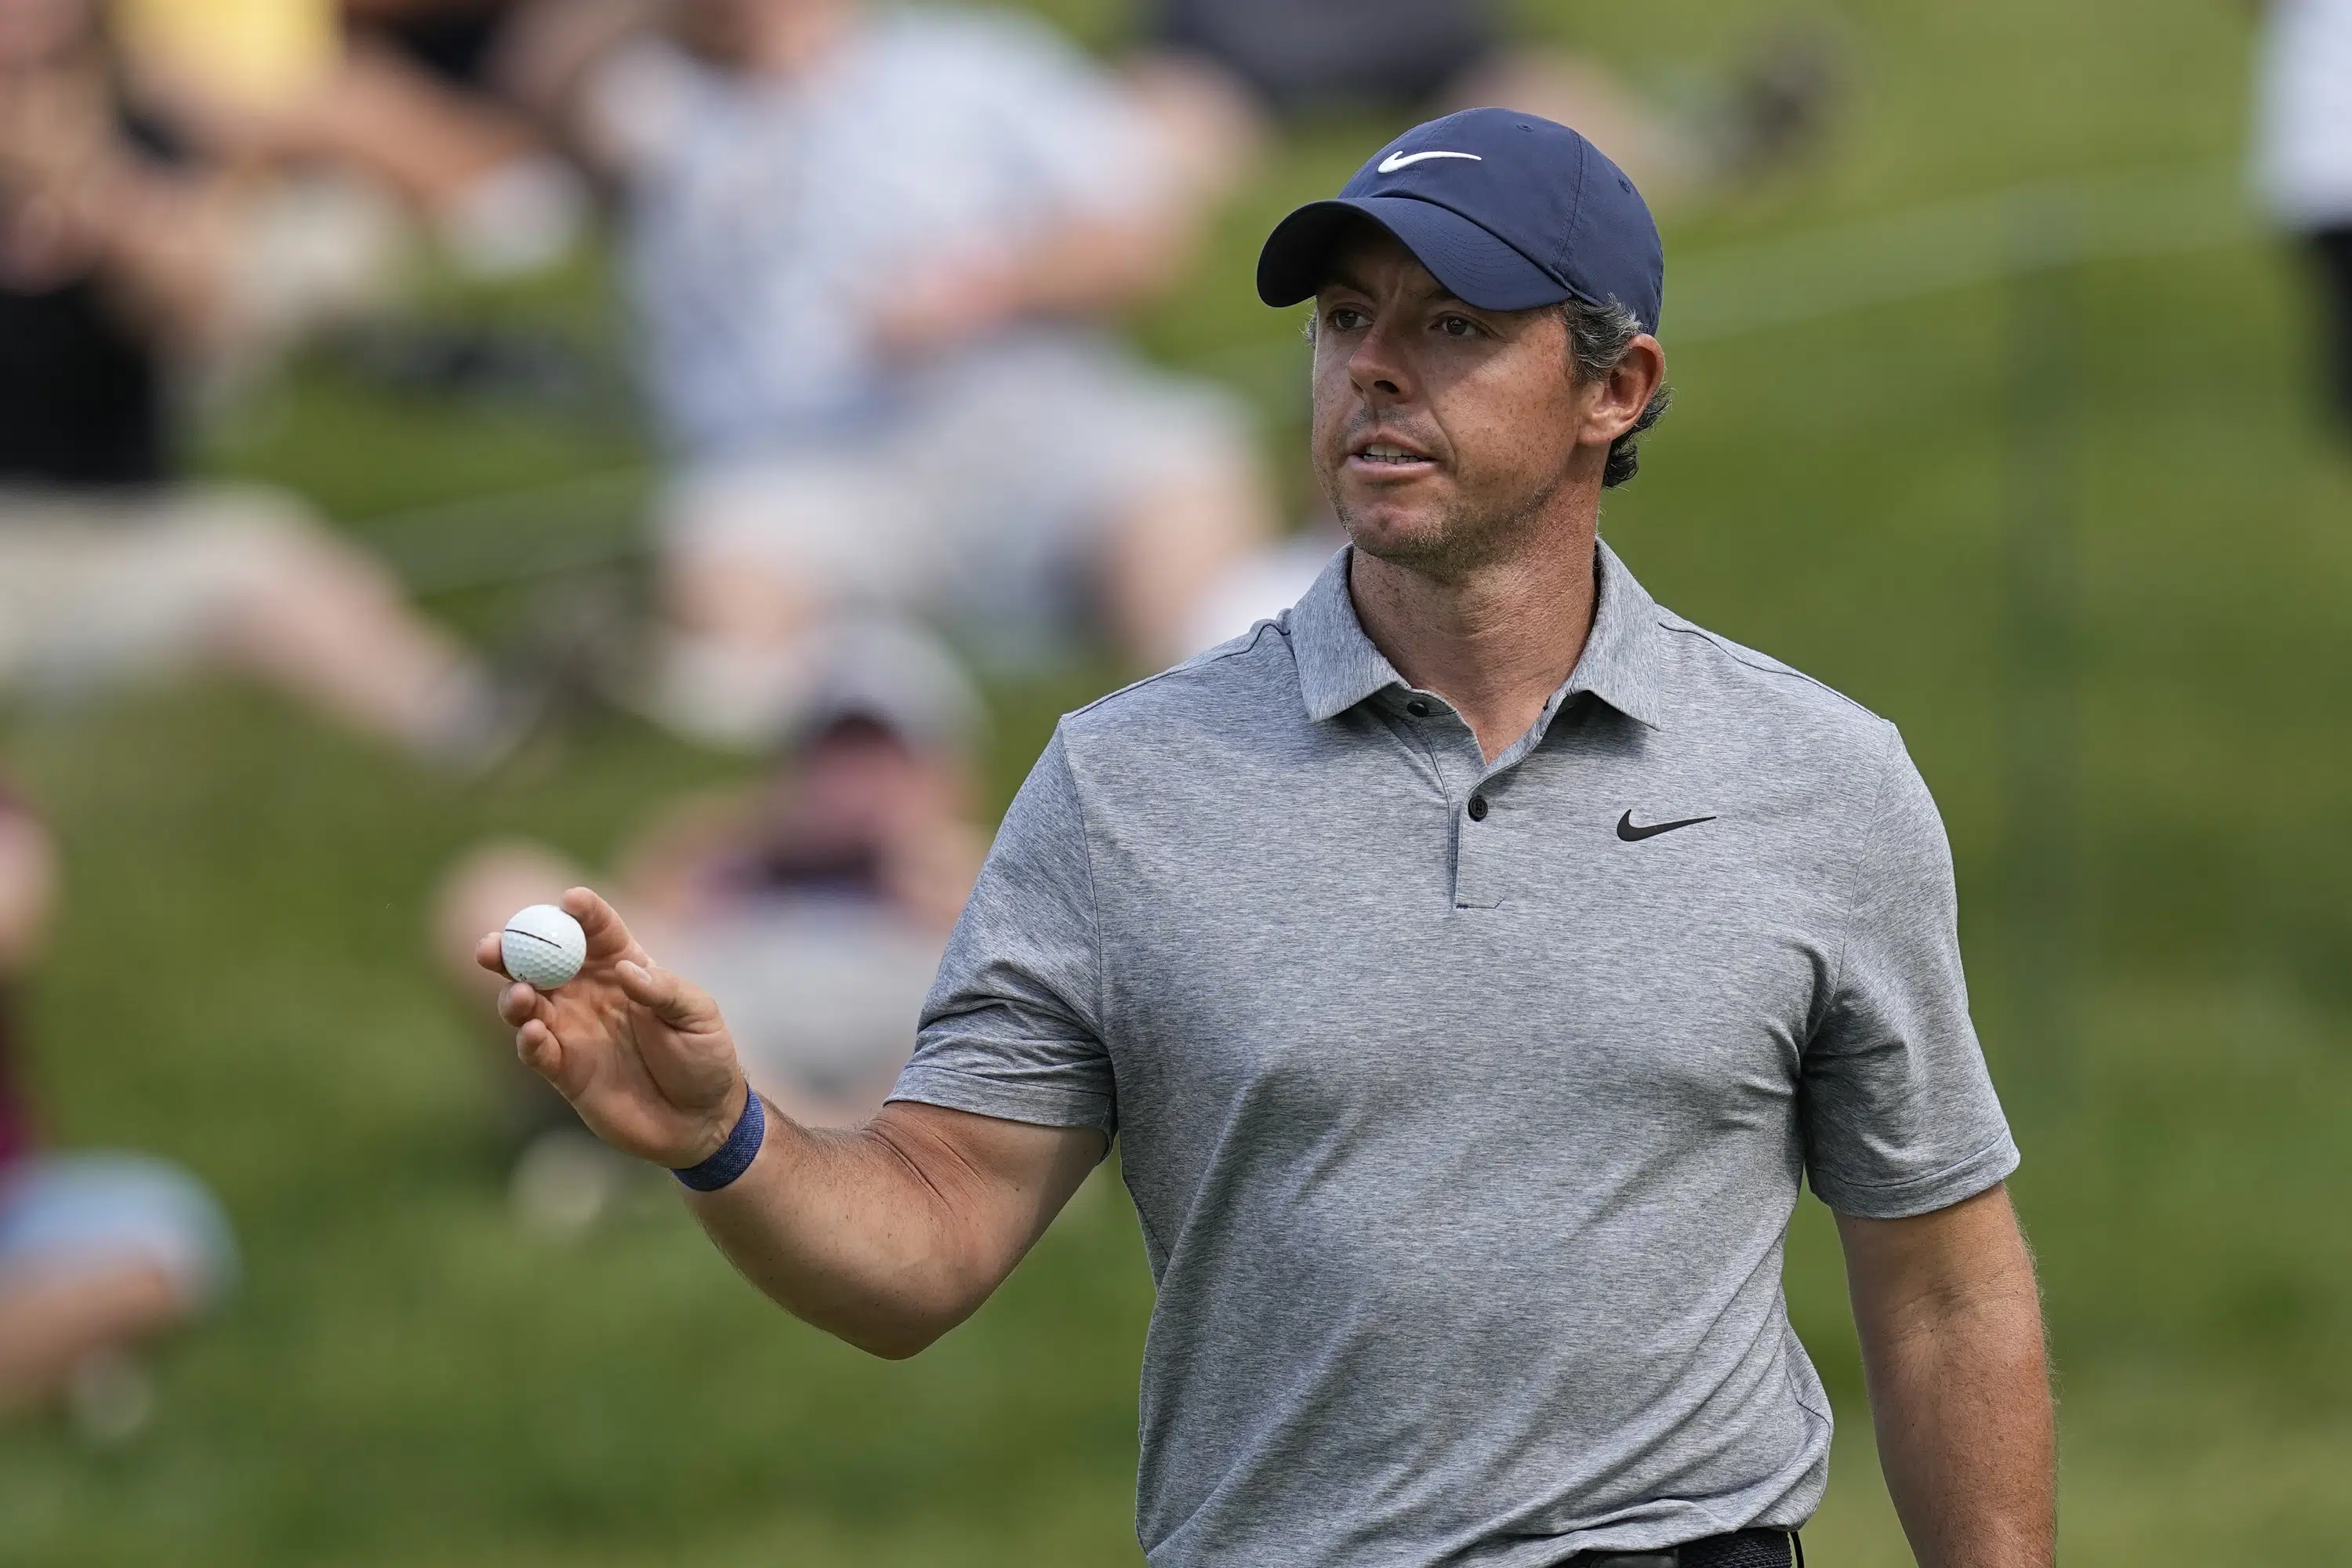 McIlroy tied for lead at Memorial by making fewest mistakes